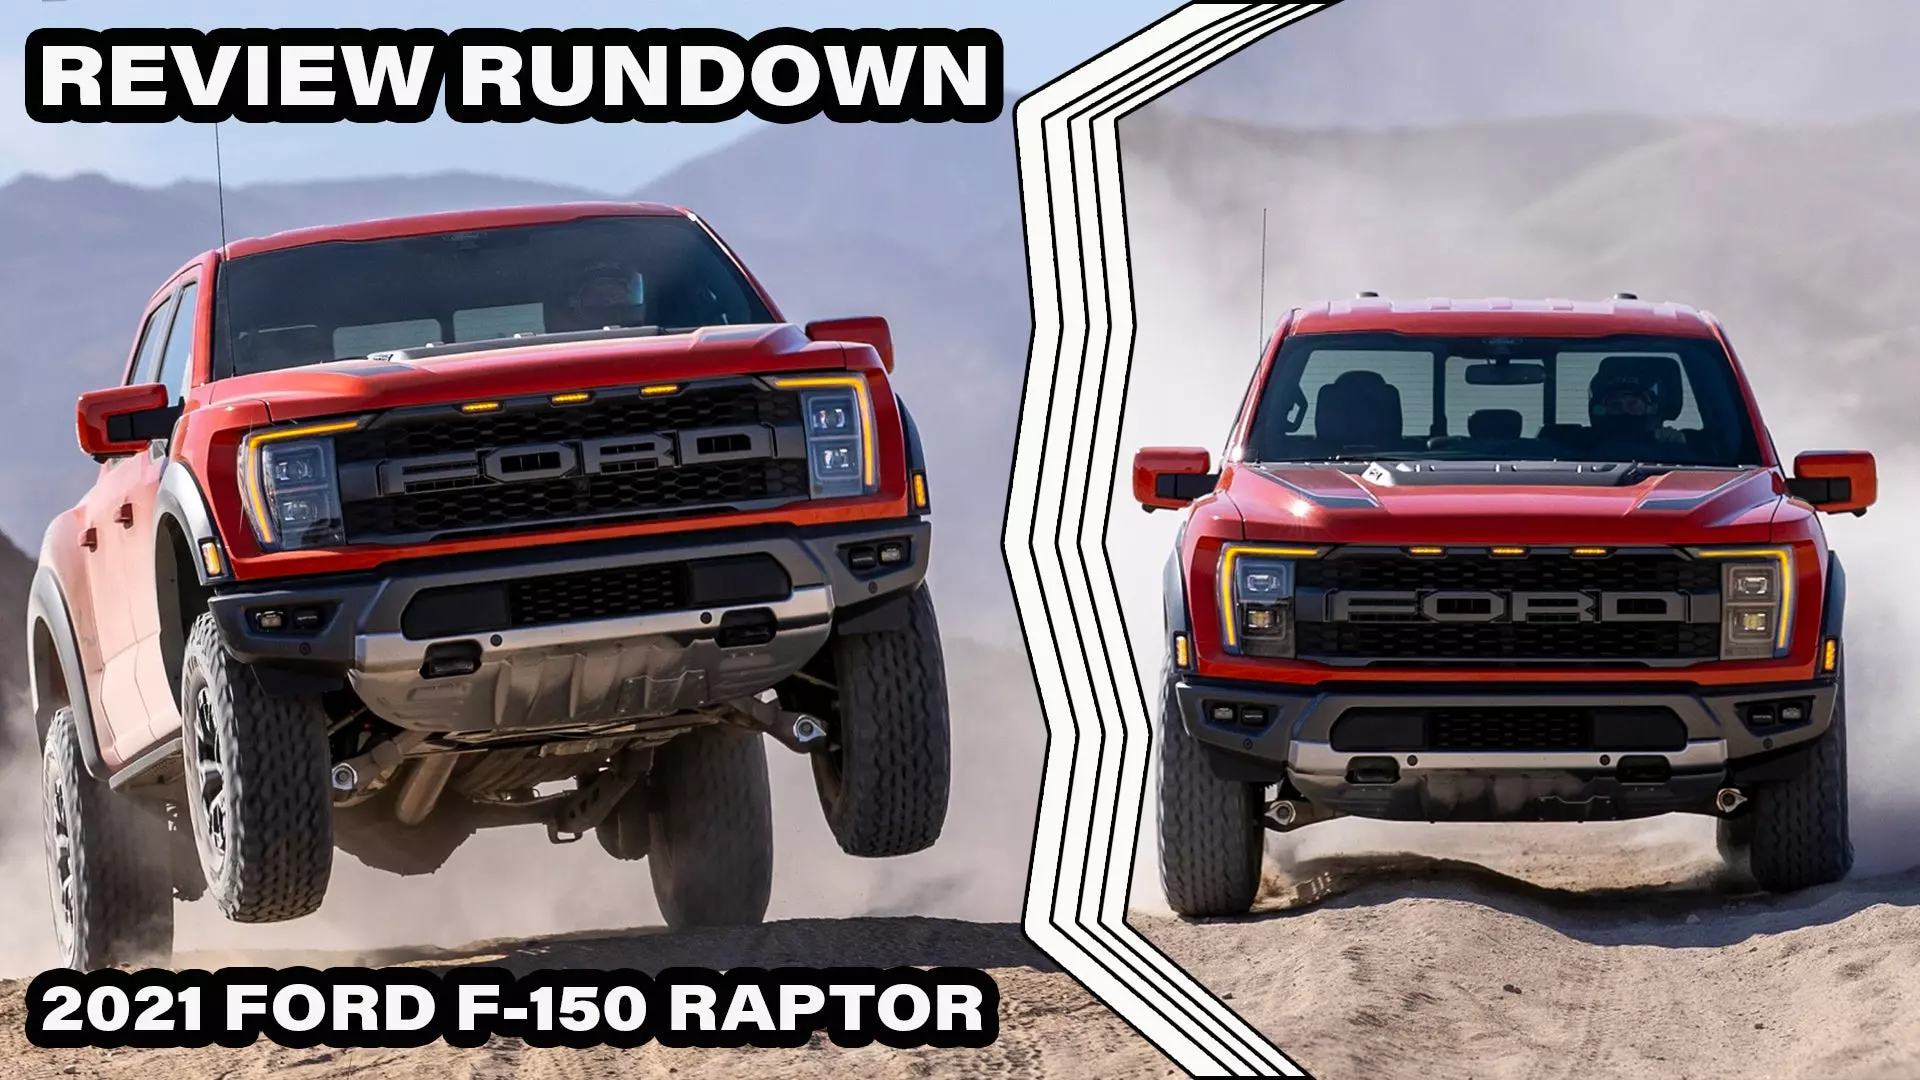 The 2023 Ford F-150 Raptor Gets Improved Flight-Worthiness and More Pulling Power | Autance